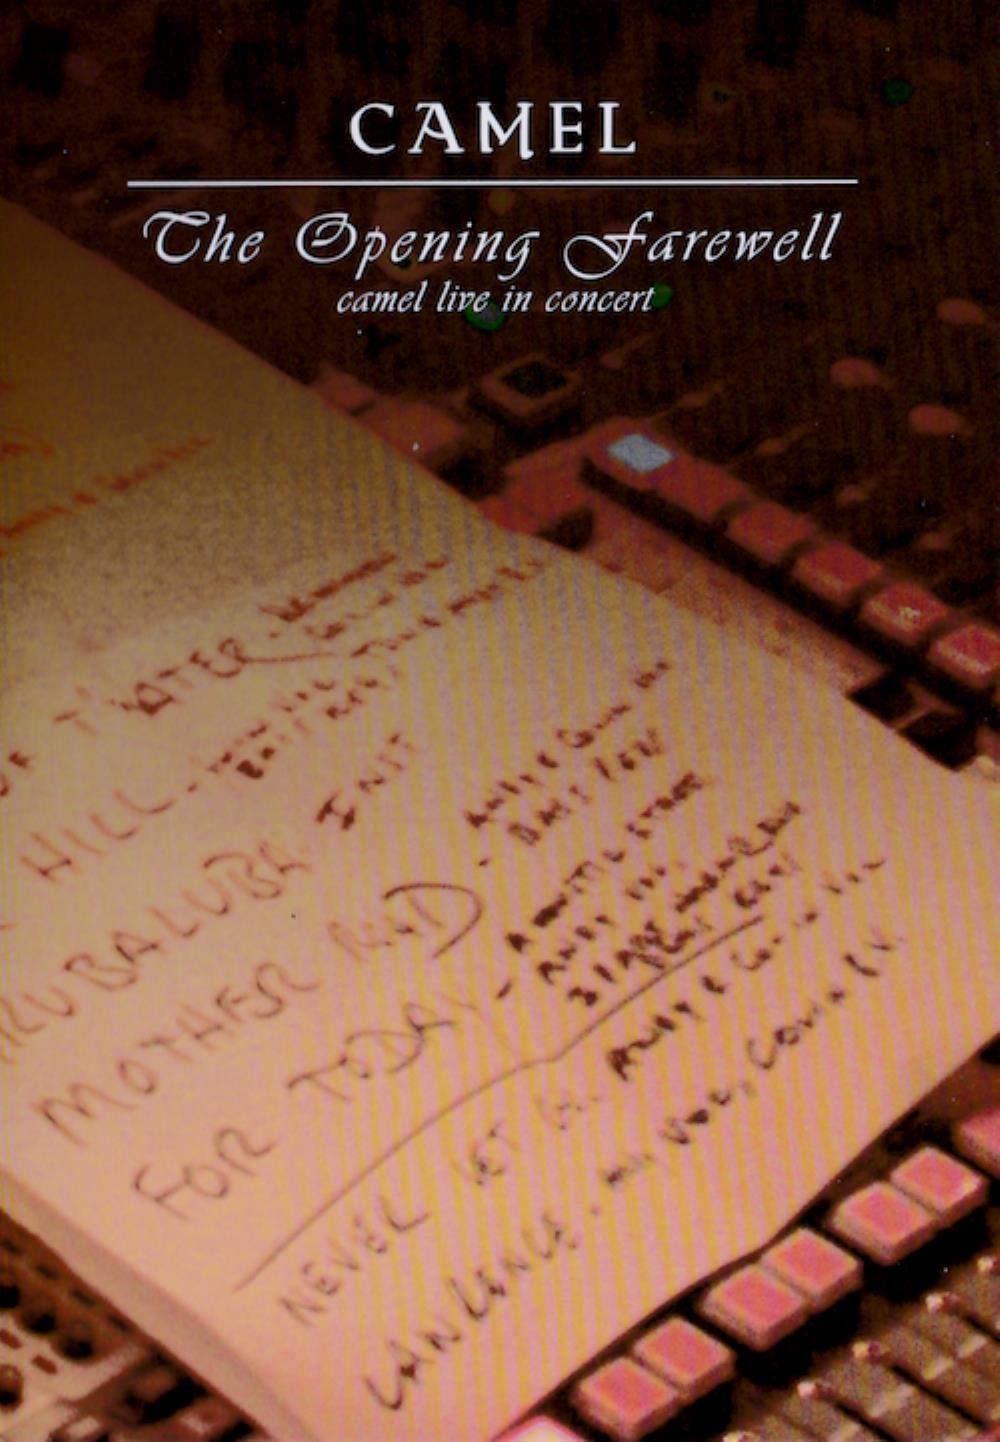 Camel - The Opening Farewell: Camel Live in Concert CD (album) cover